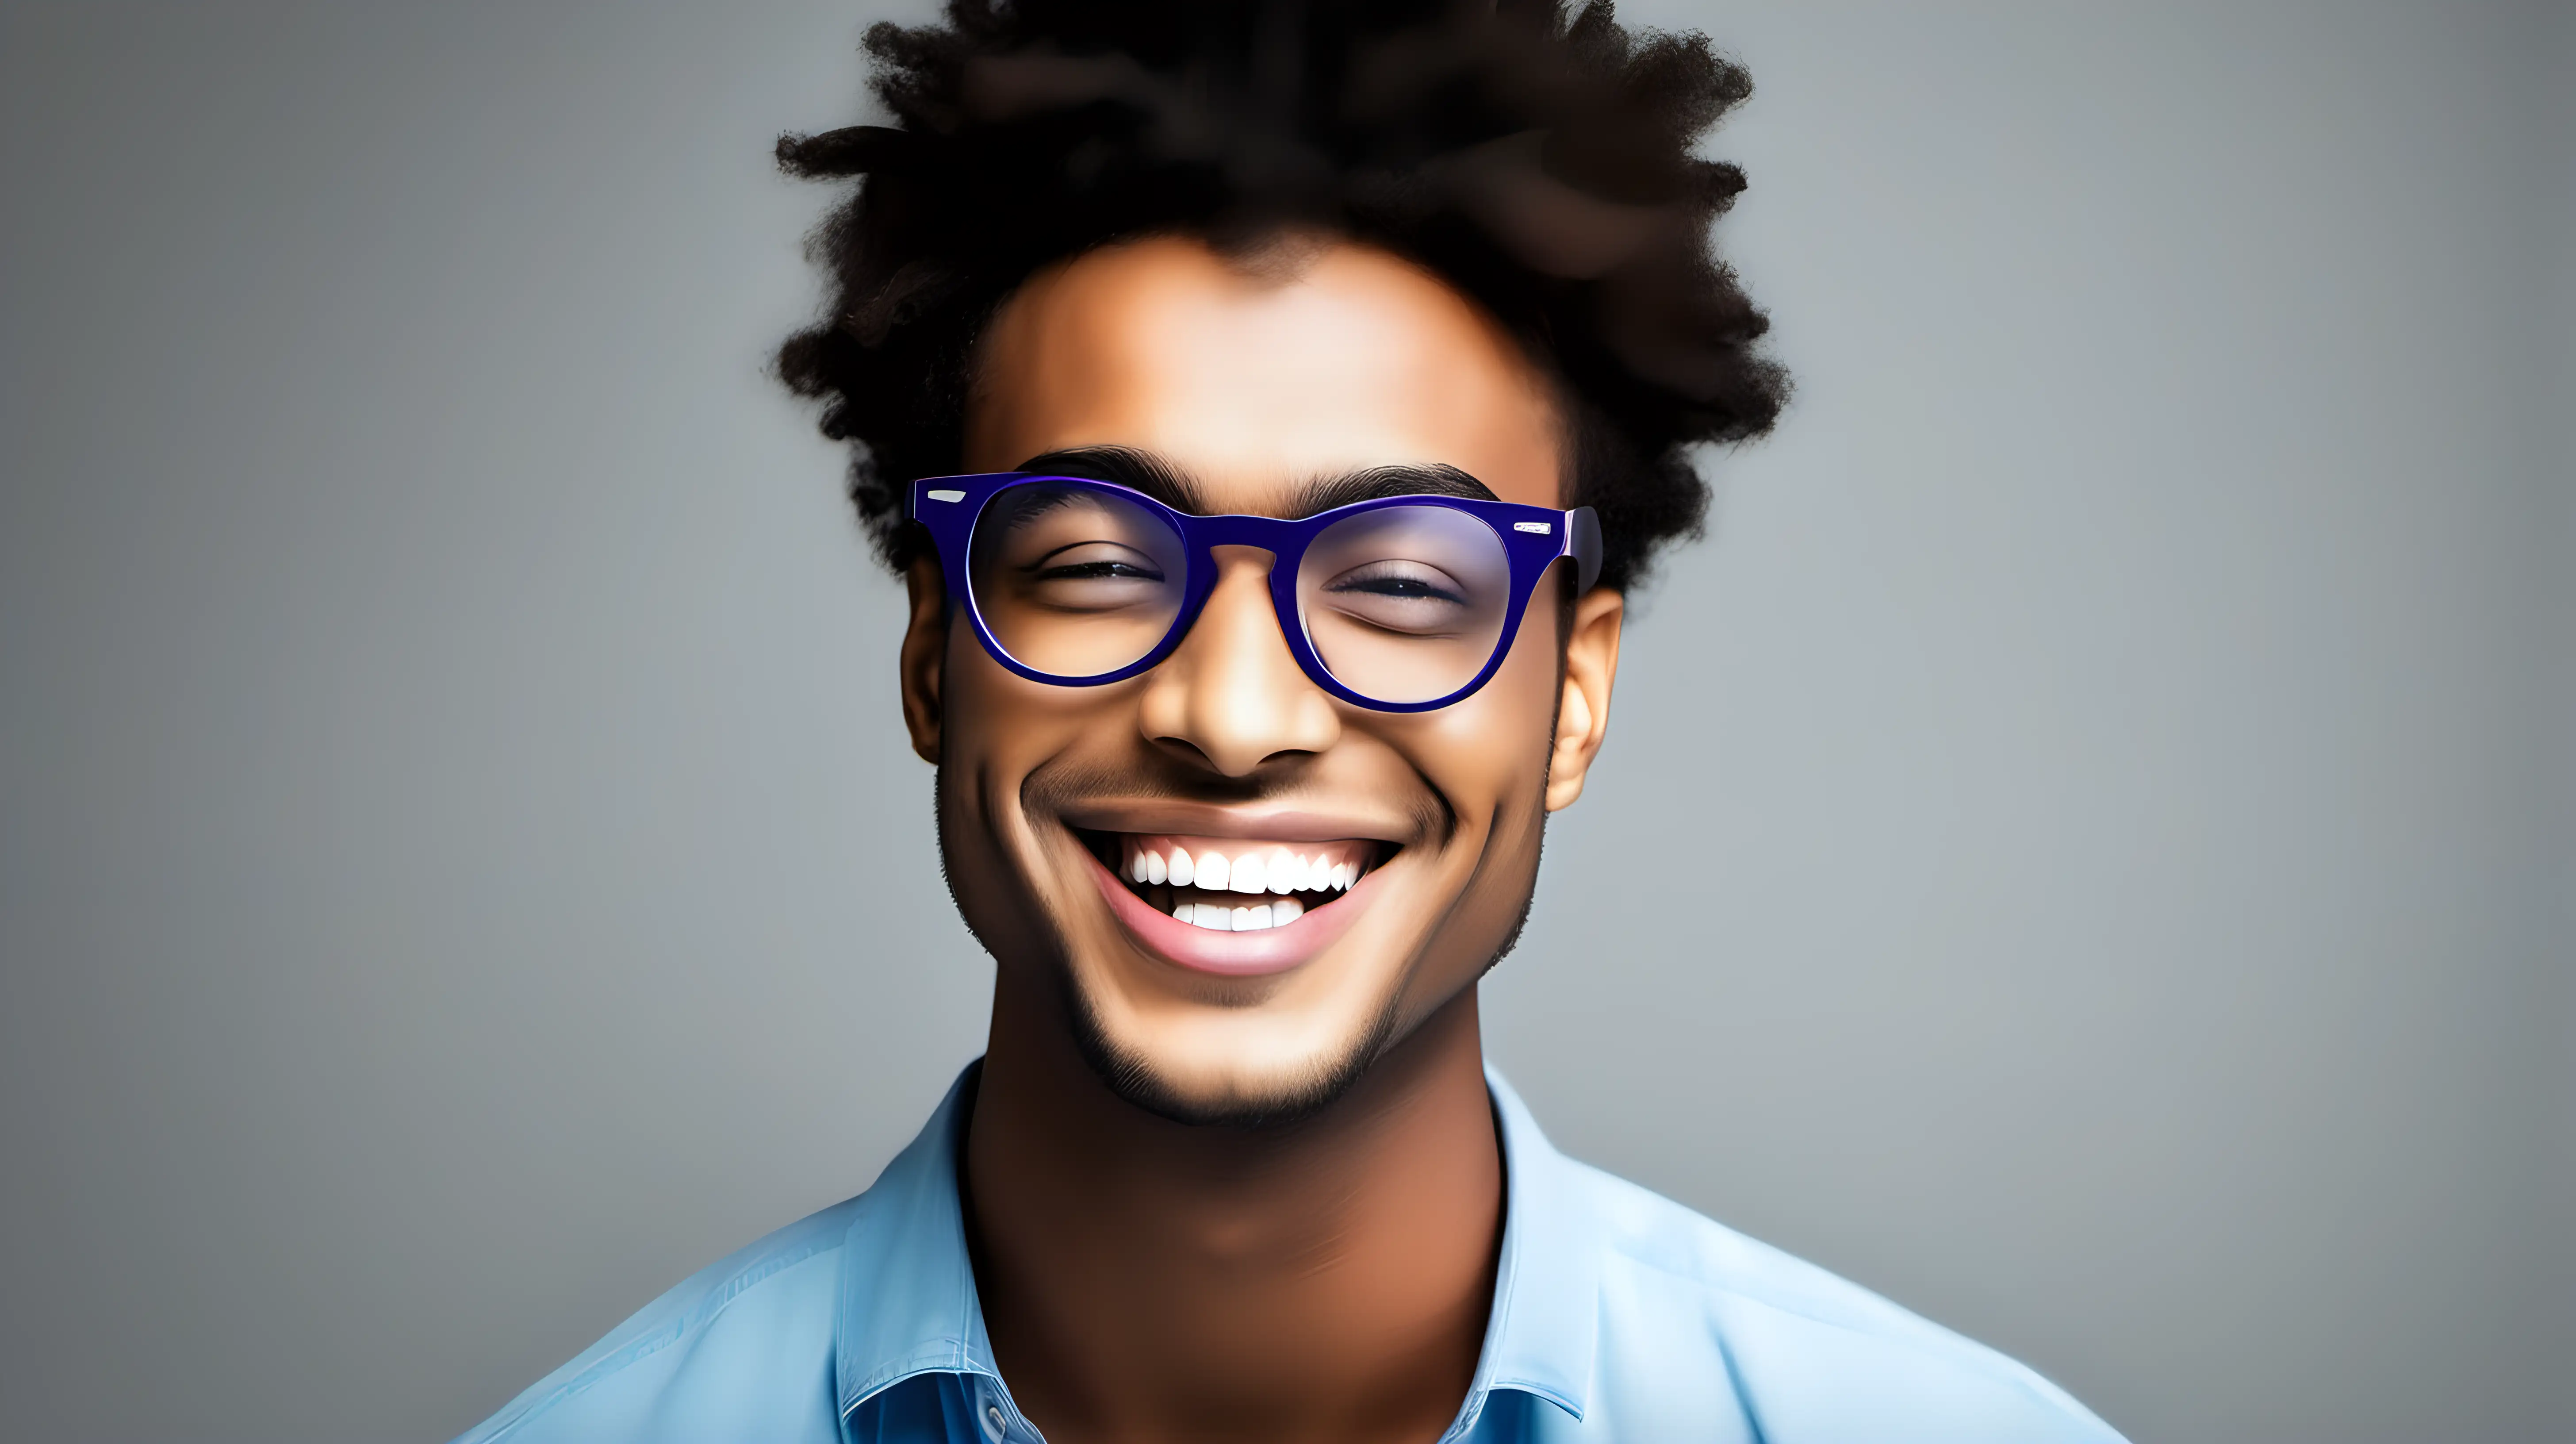 Energetic Youth with Trendy Glasses in Vibrant Portrait